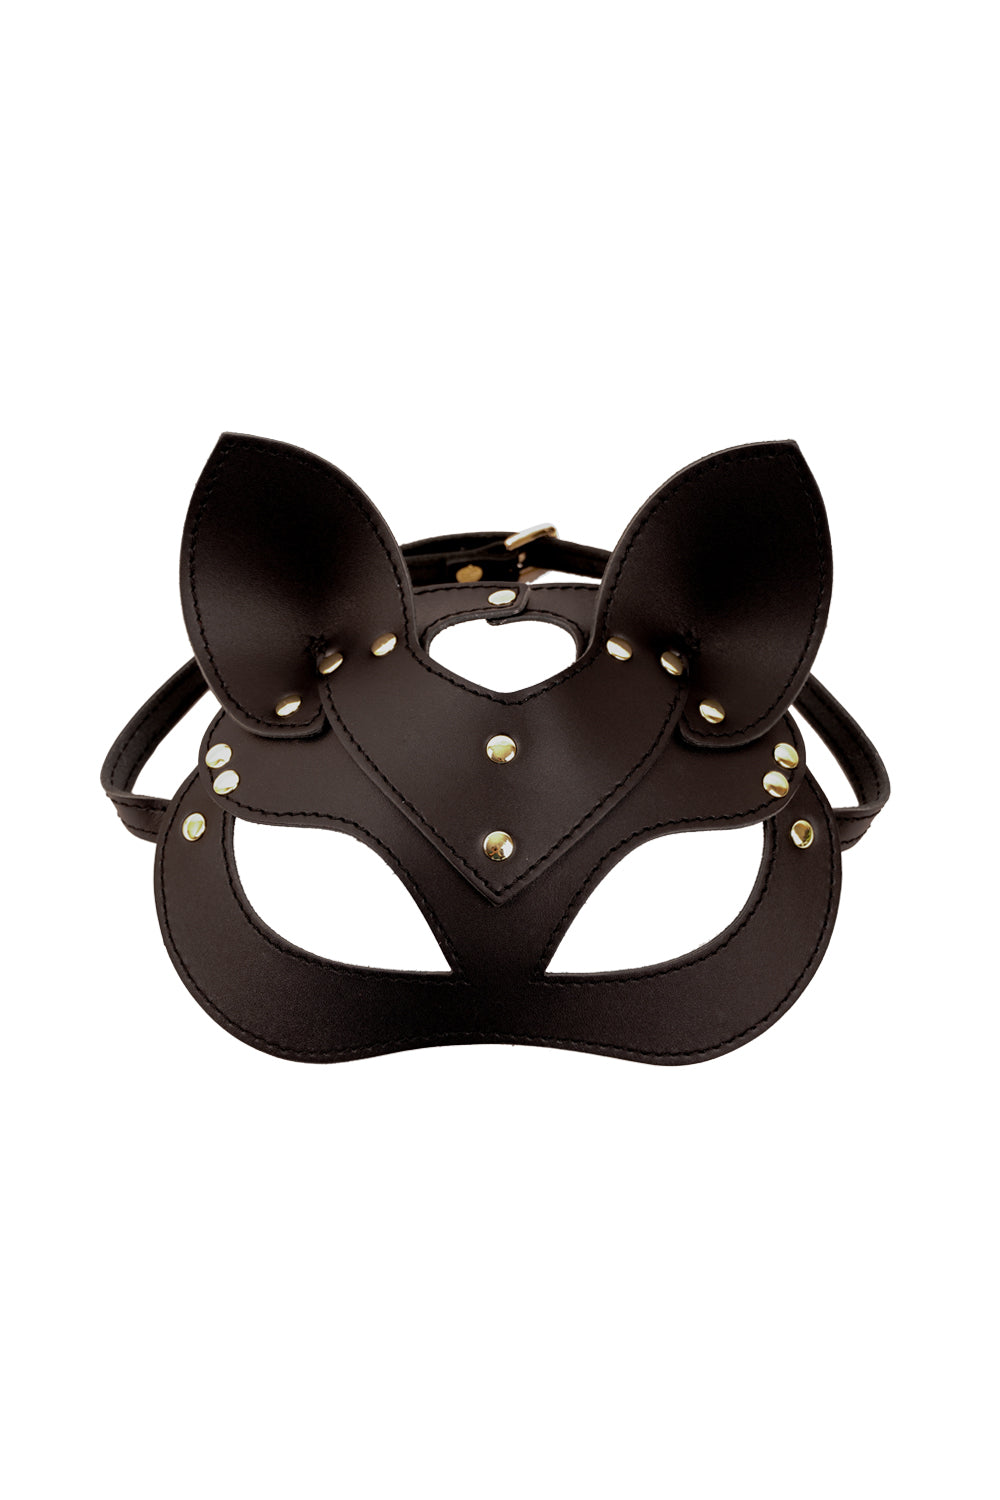 Leather сat mask, kitty fetish mask. 10 colors